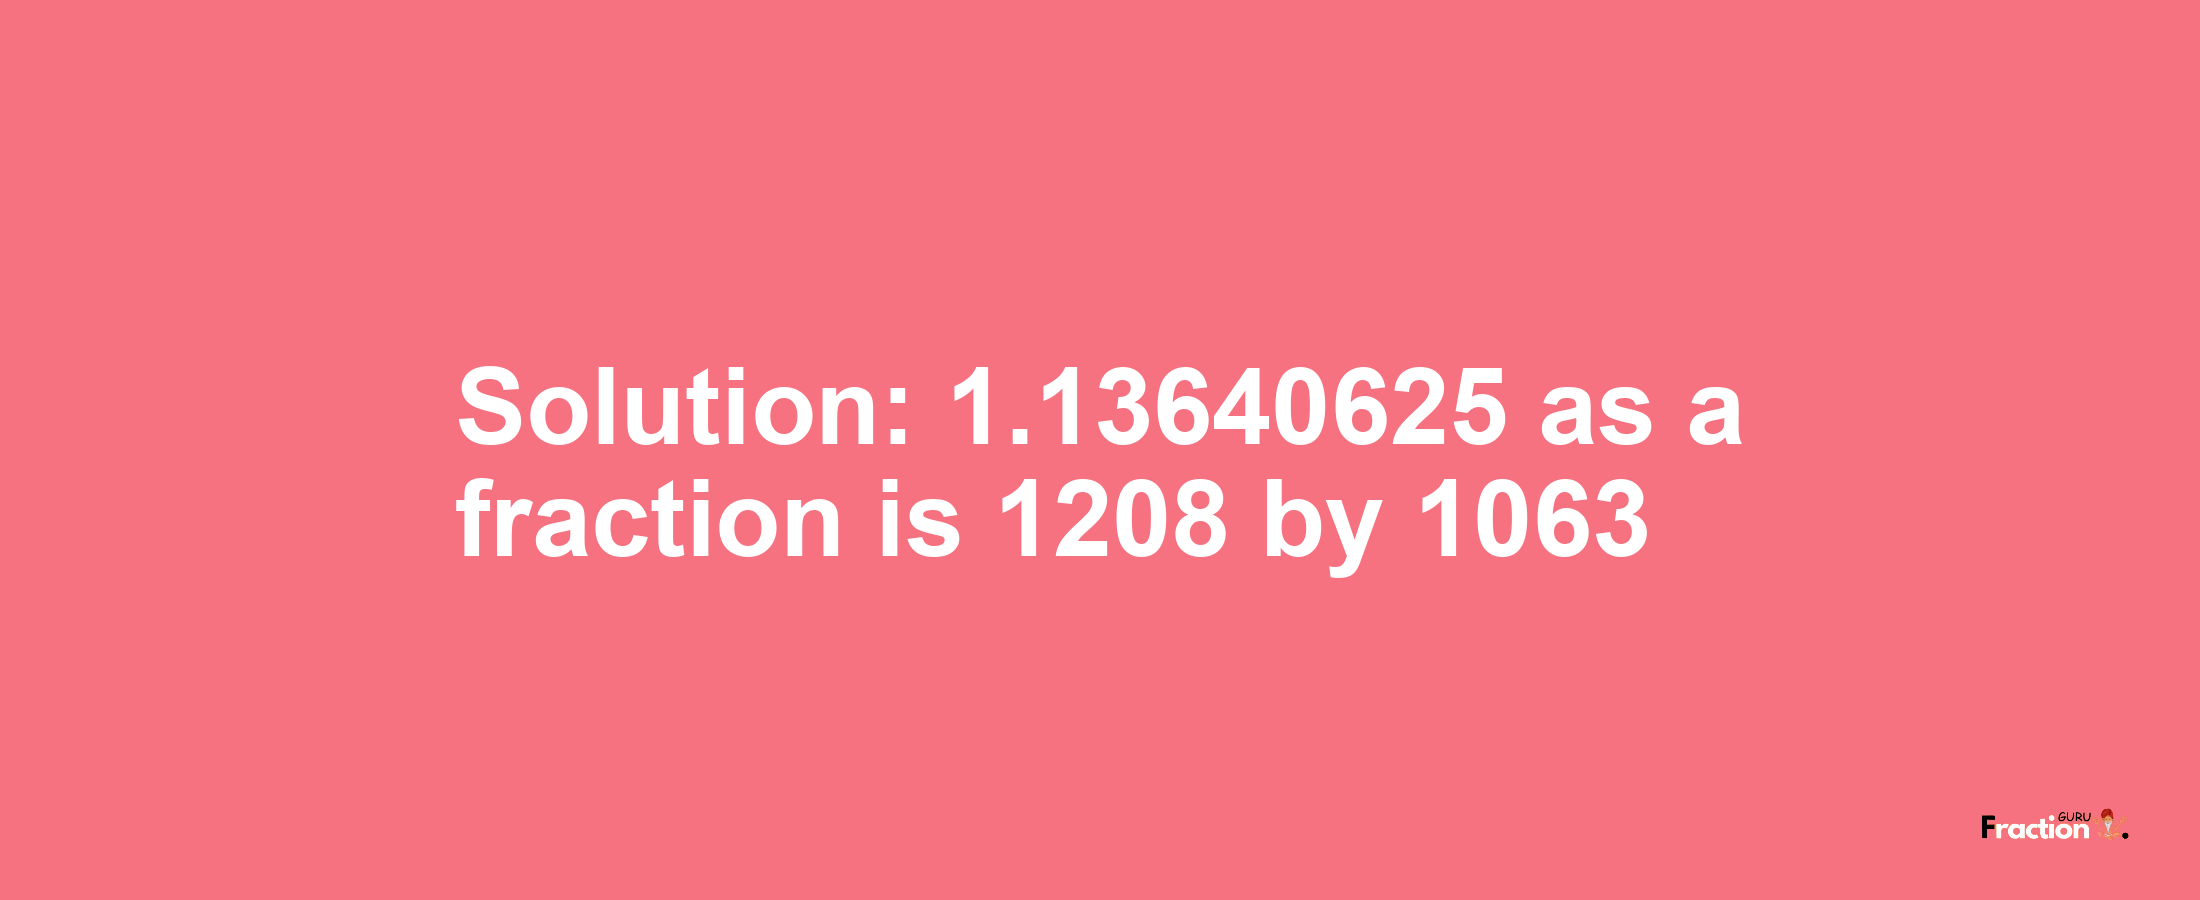 Solution:1.13640625 as a fraction is 1208/1063